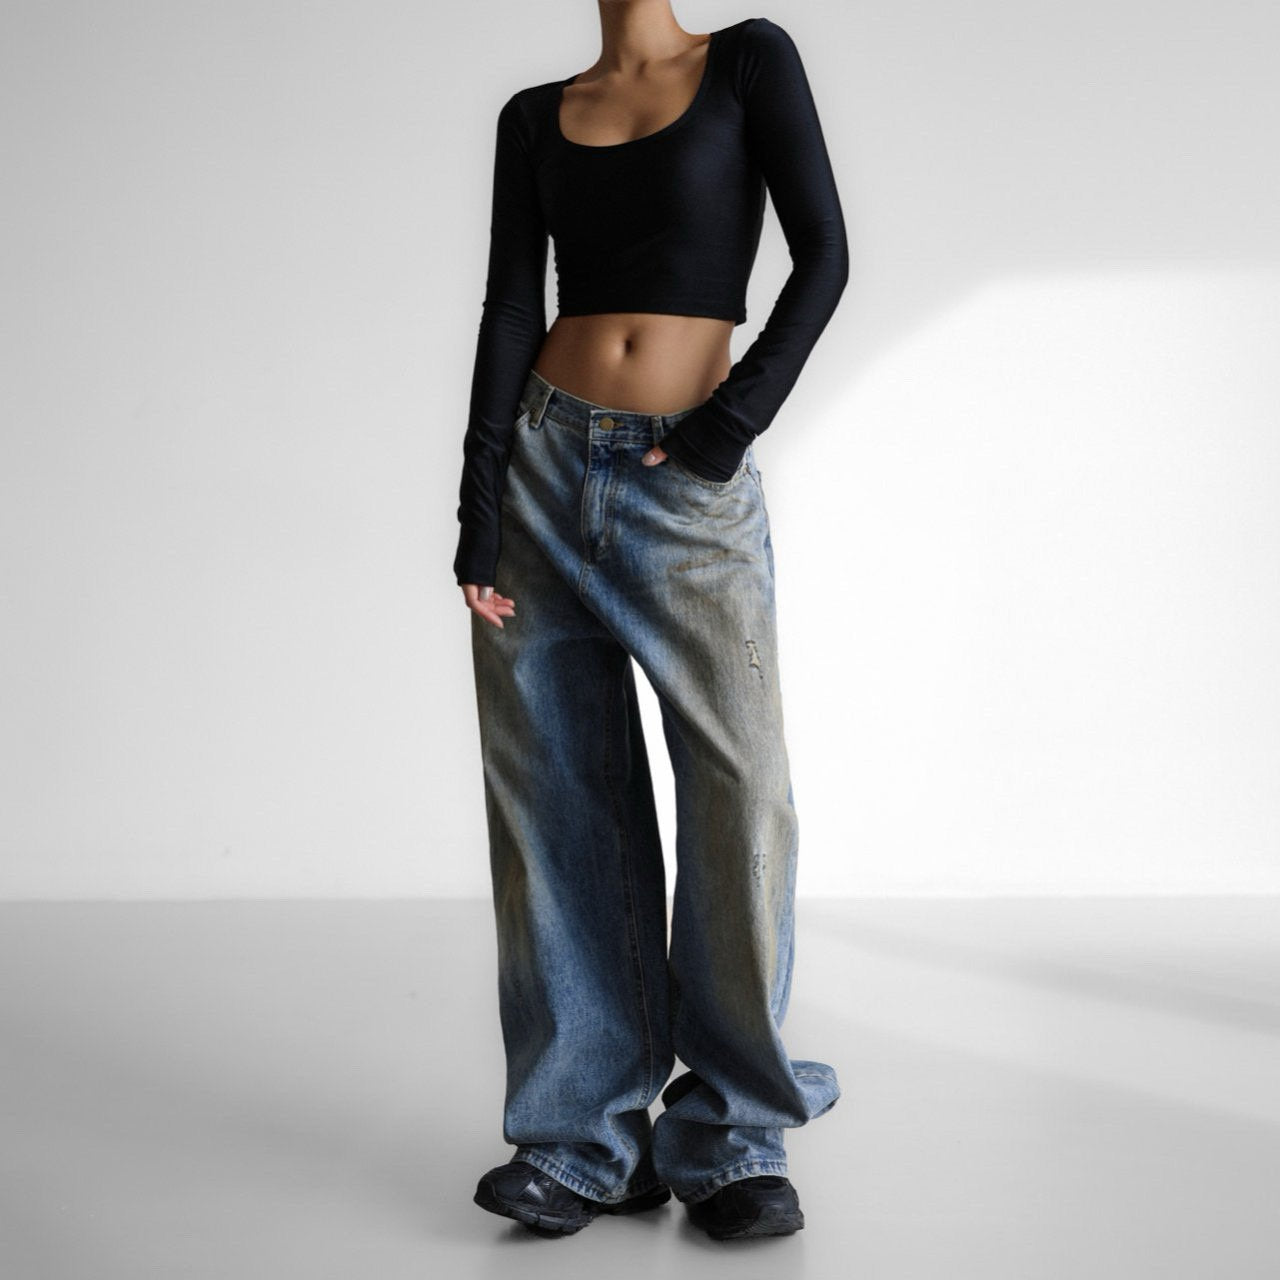 [PAPERMOON] SS / Shiny Long Sleeved U-Neck Cropped Top